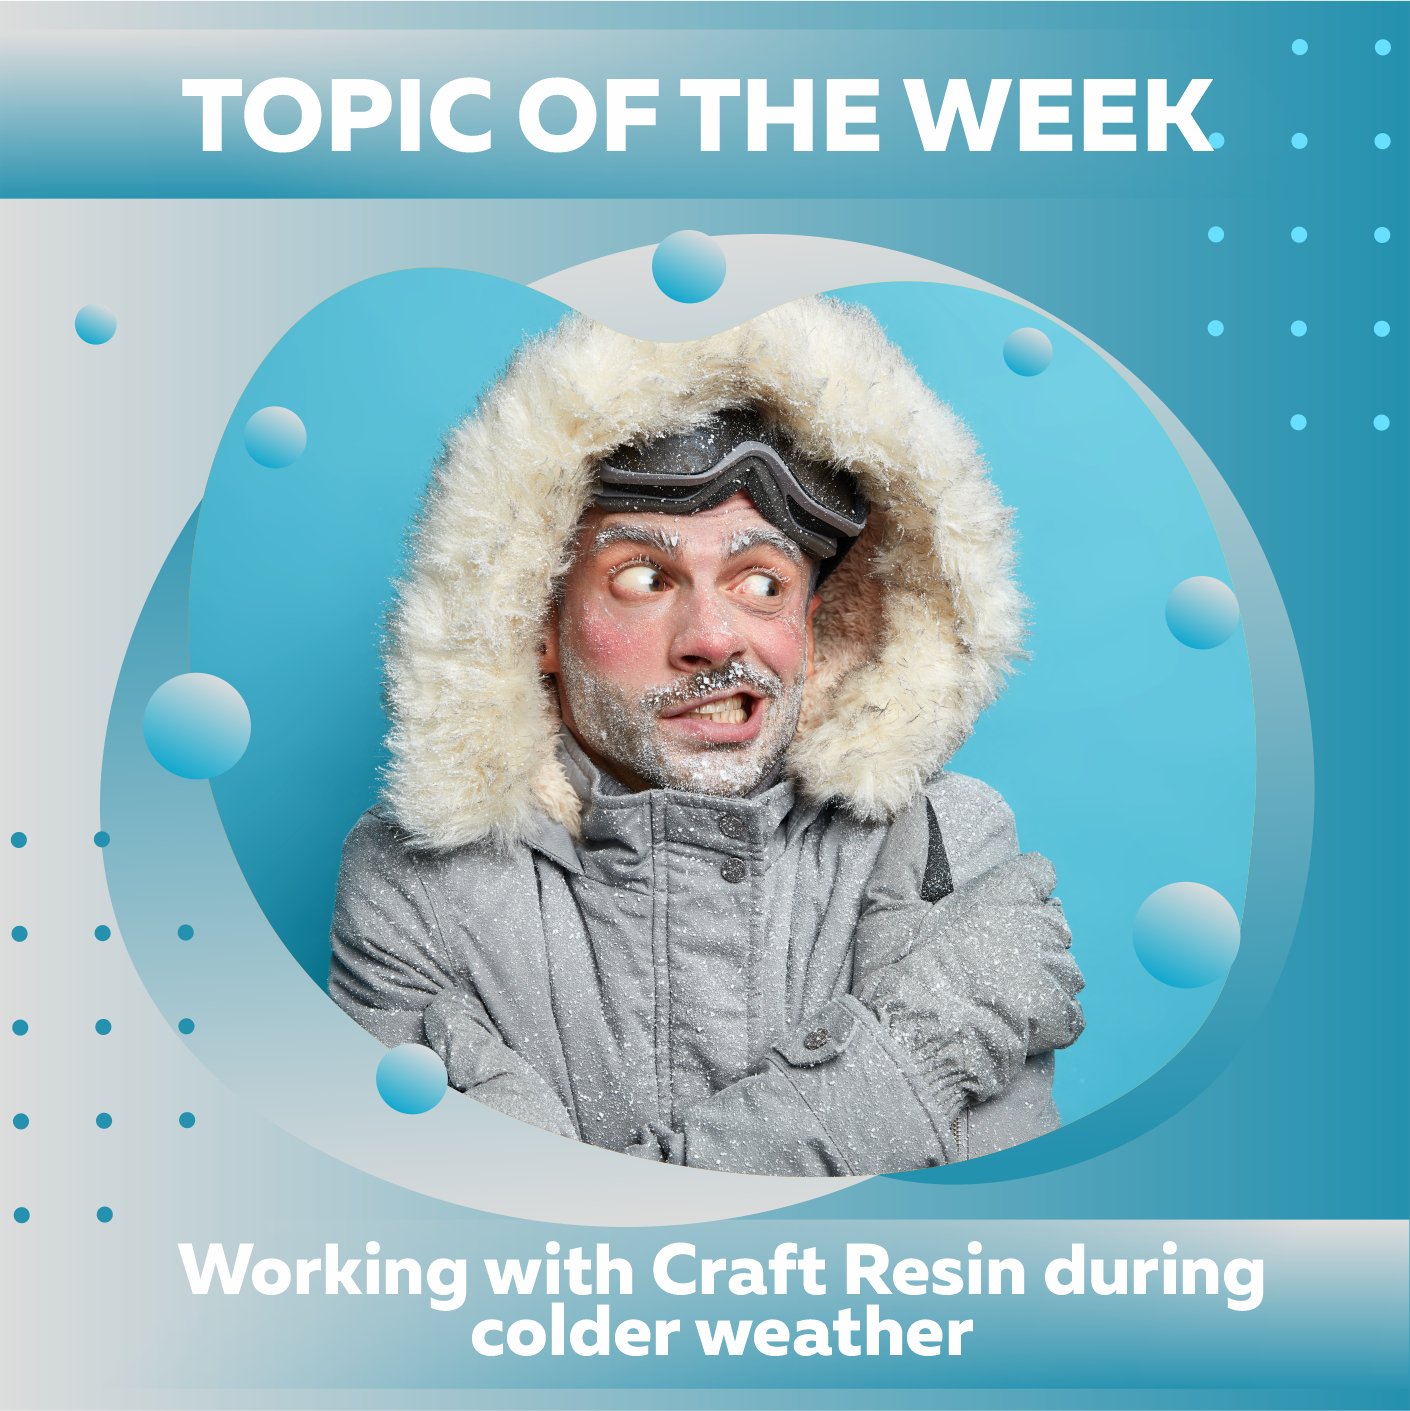 Working With Craft Resin During Colder Weather: - Craft Resin